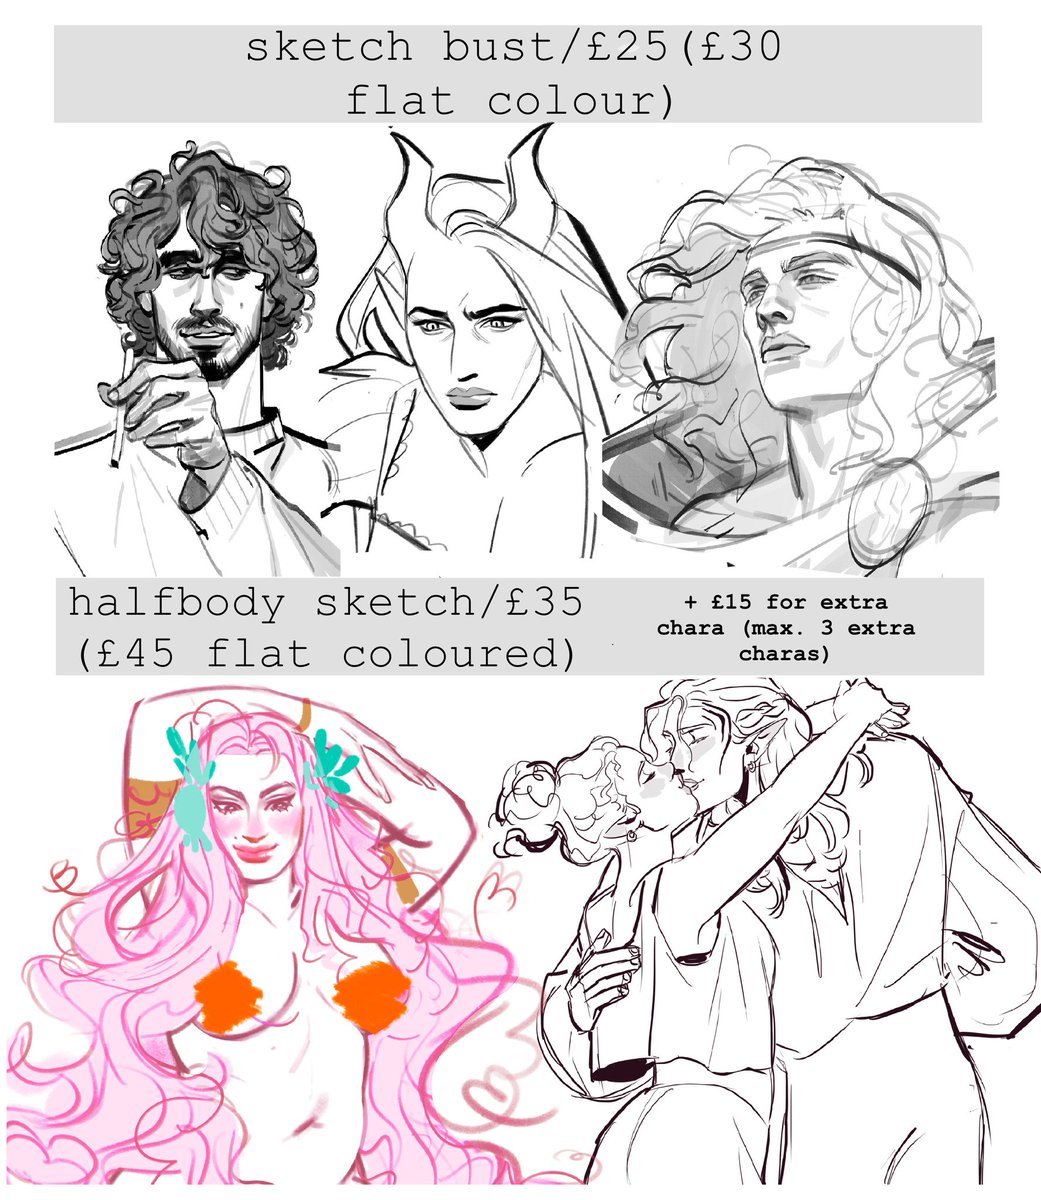 ‼️Hey guys my friend @panicfast is doing emergency commissions‼️Please  share  this  if  youre  not  able  to  commission  her.  More  commission  info  here https://t.co/EVLhxVKi5b 